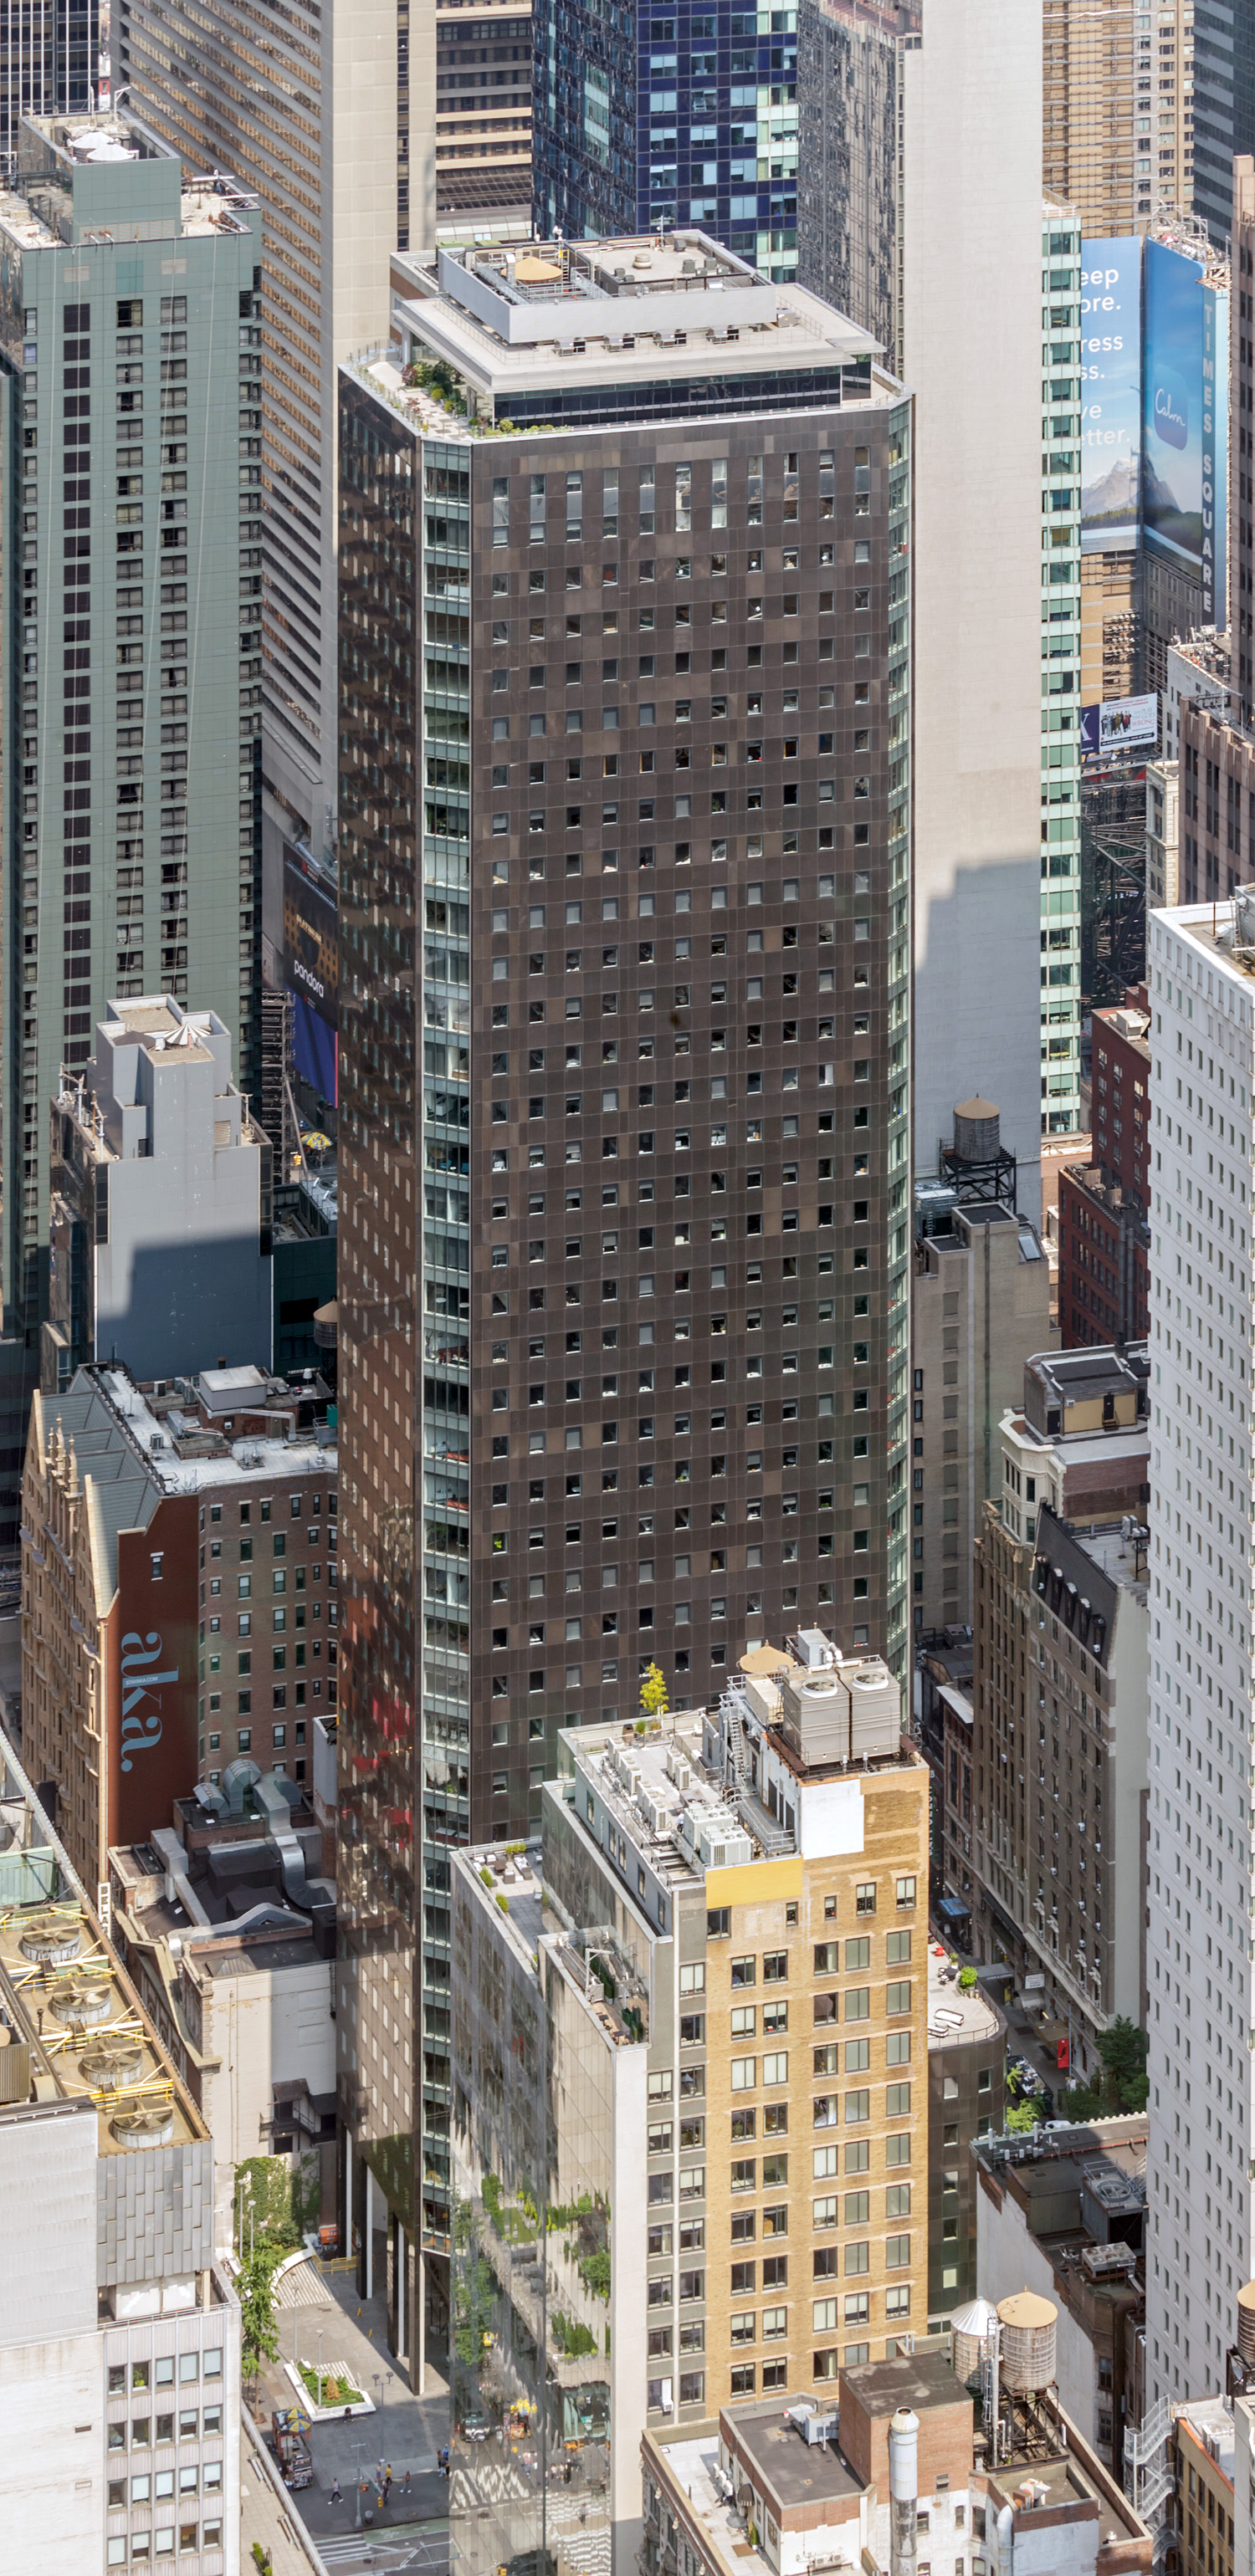 1155 Avenue of the Americas, New York City - View from One Vanderbilt. © Mathias Beinling